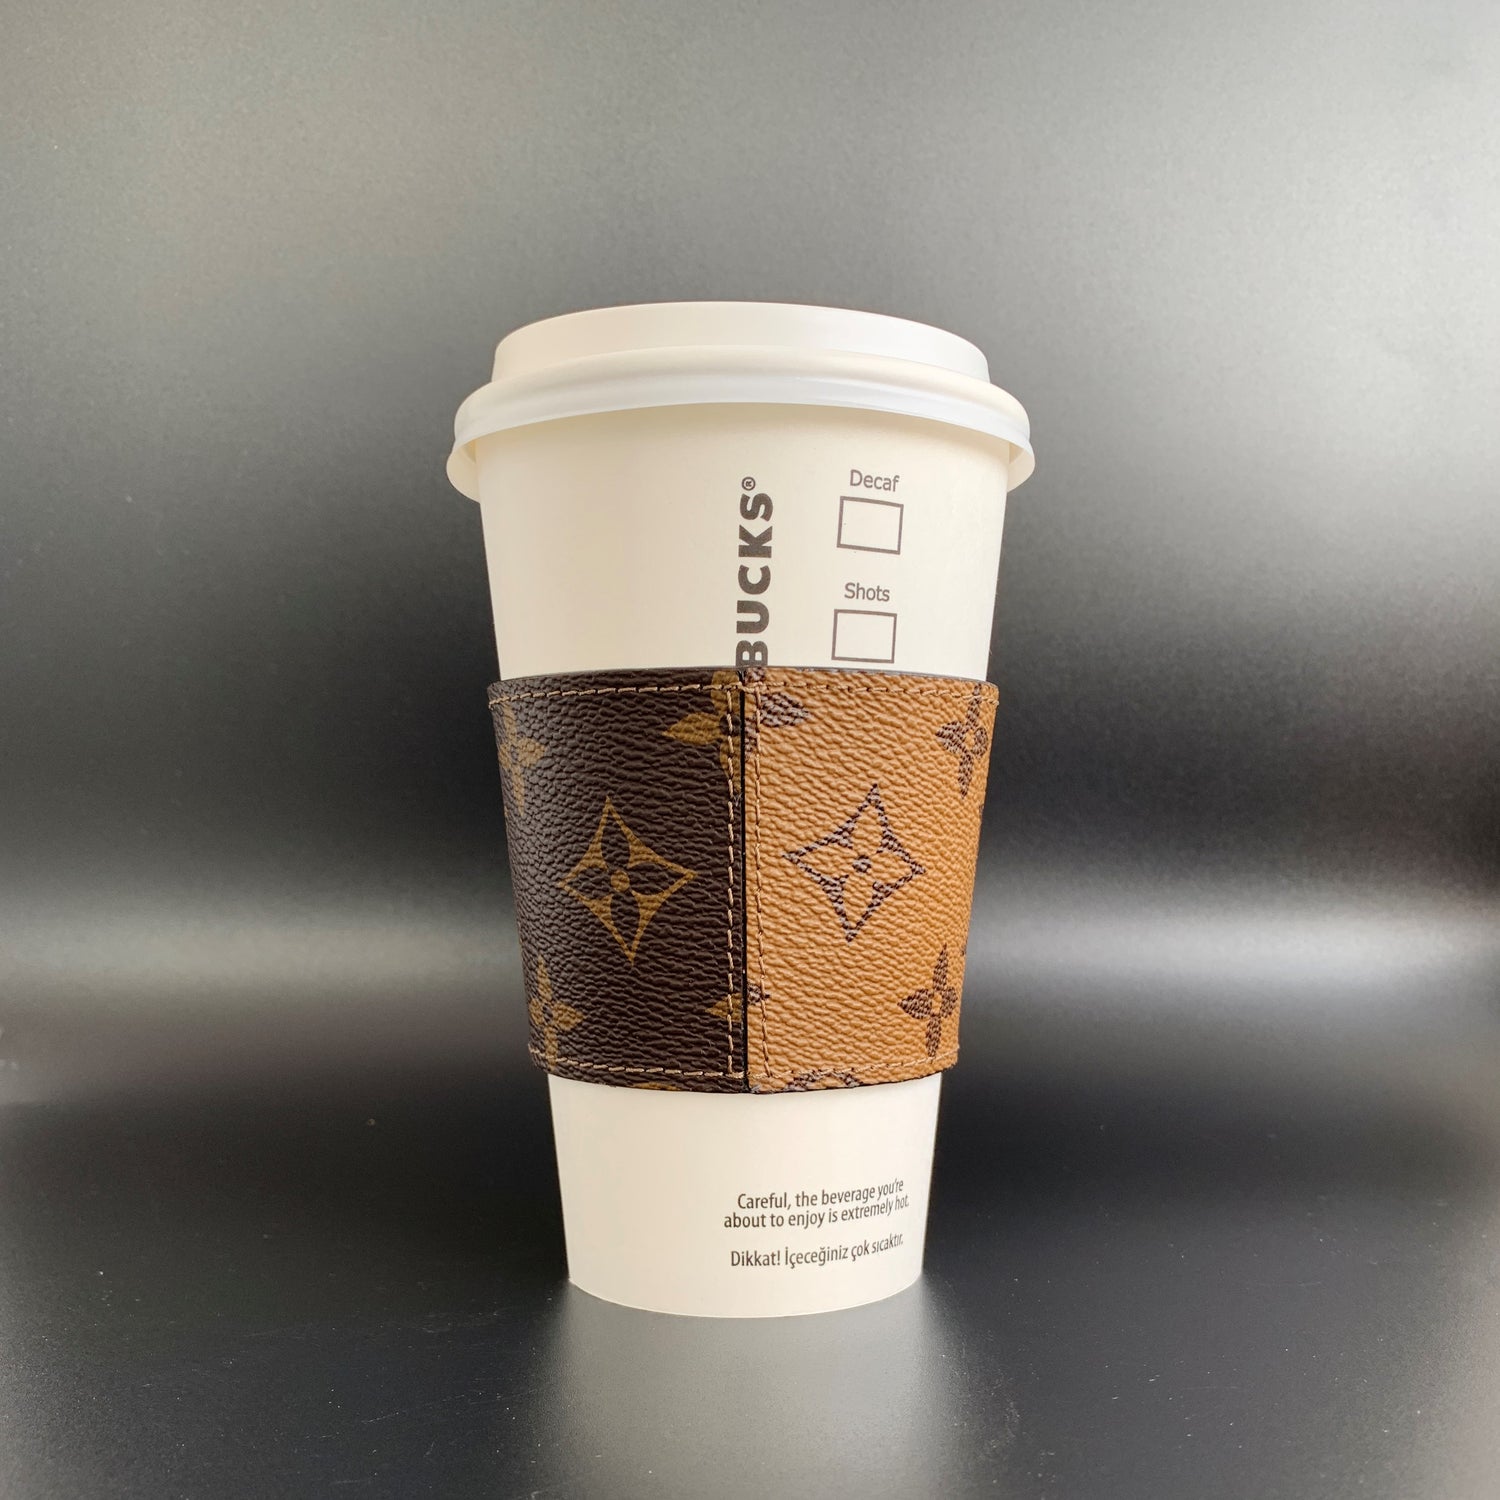 vuitton coffee cup sleeve